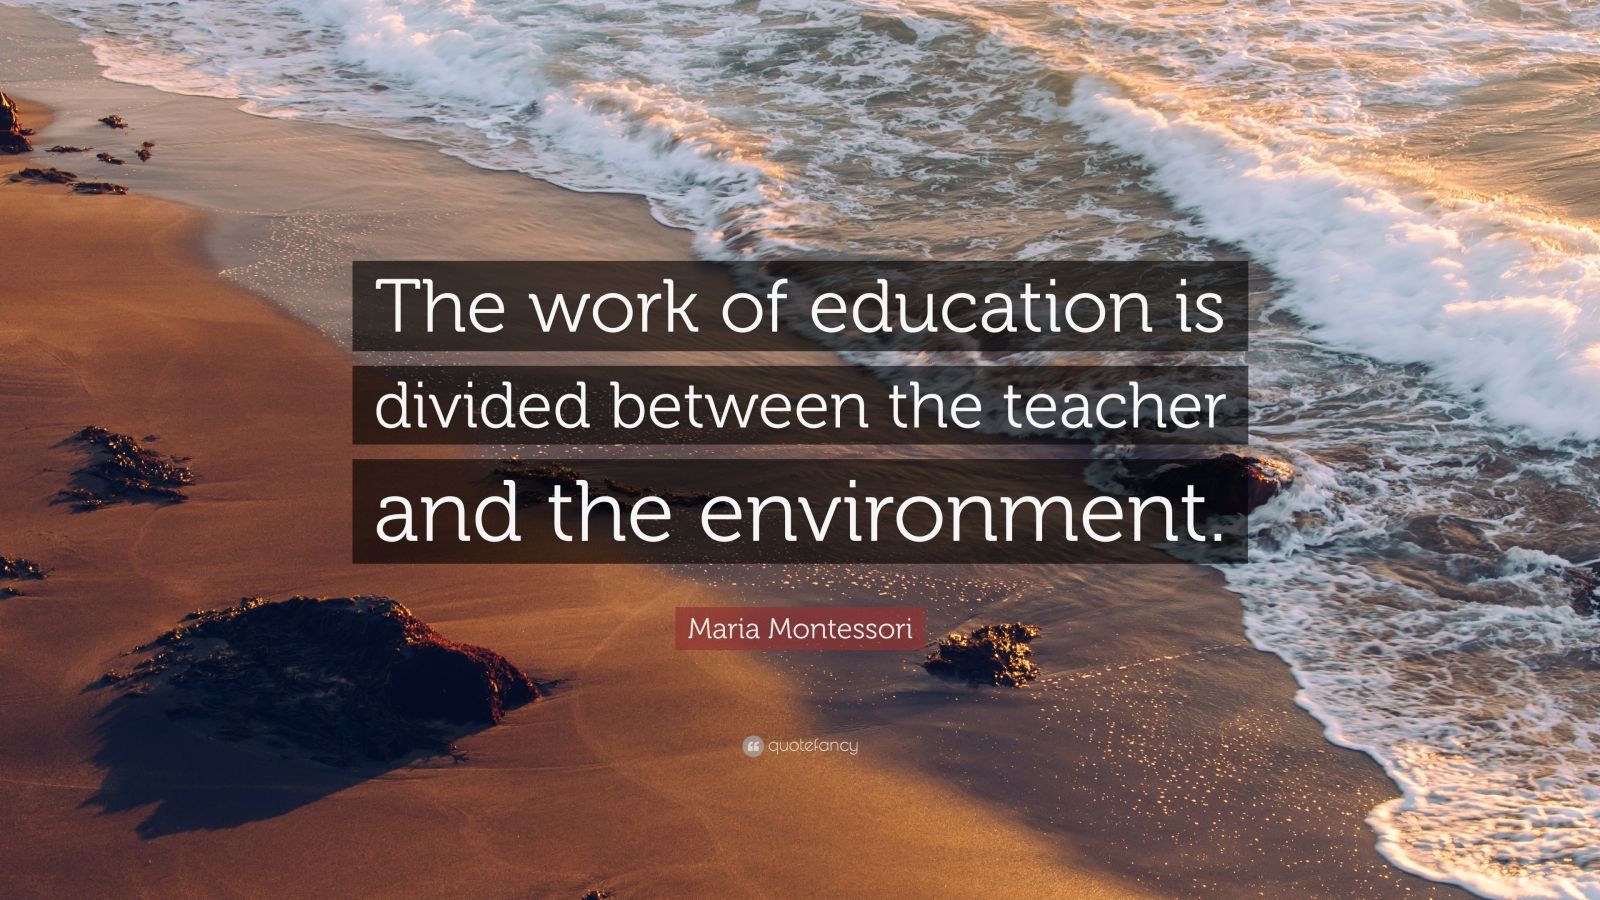 Maria Montessori Quote: “The work of education is divided between the